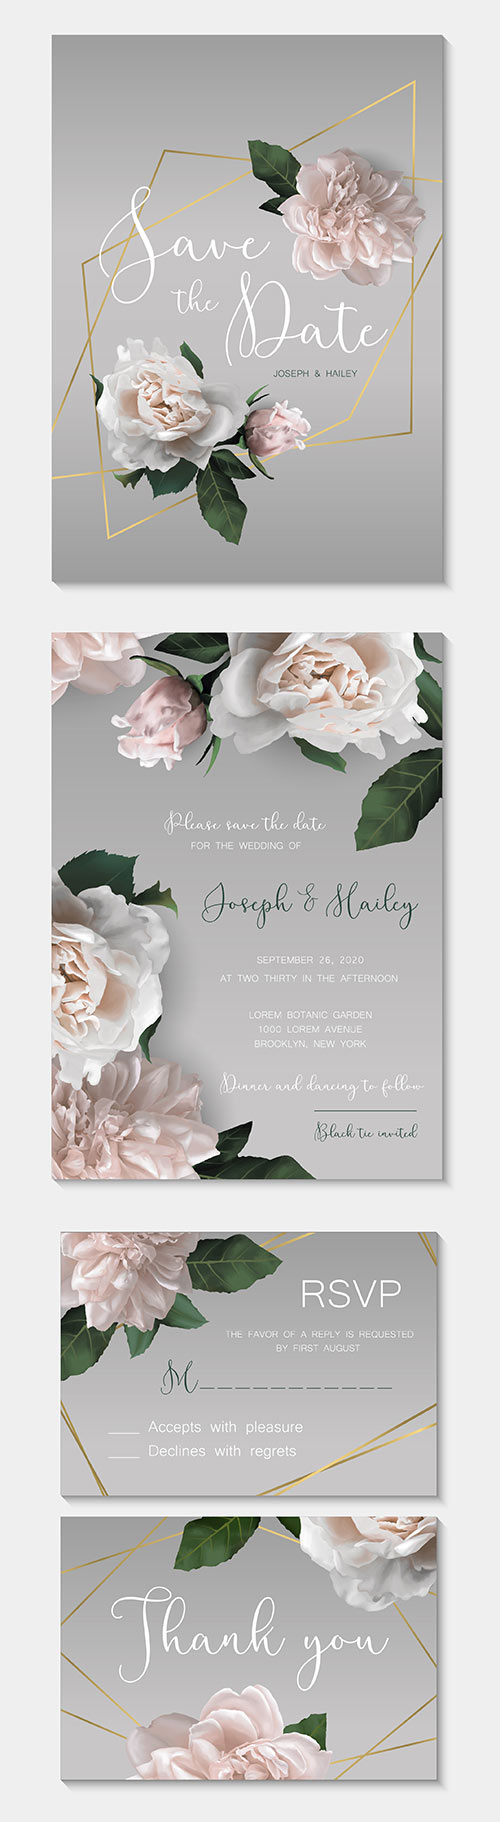 Wedding Invitation Suite with Flowers